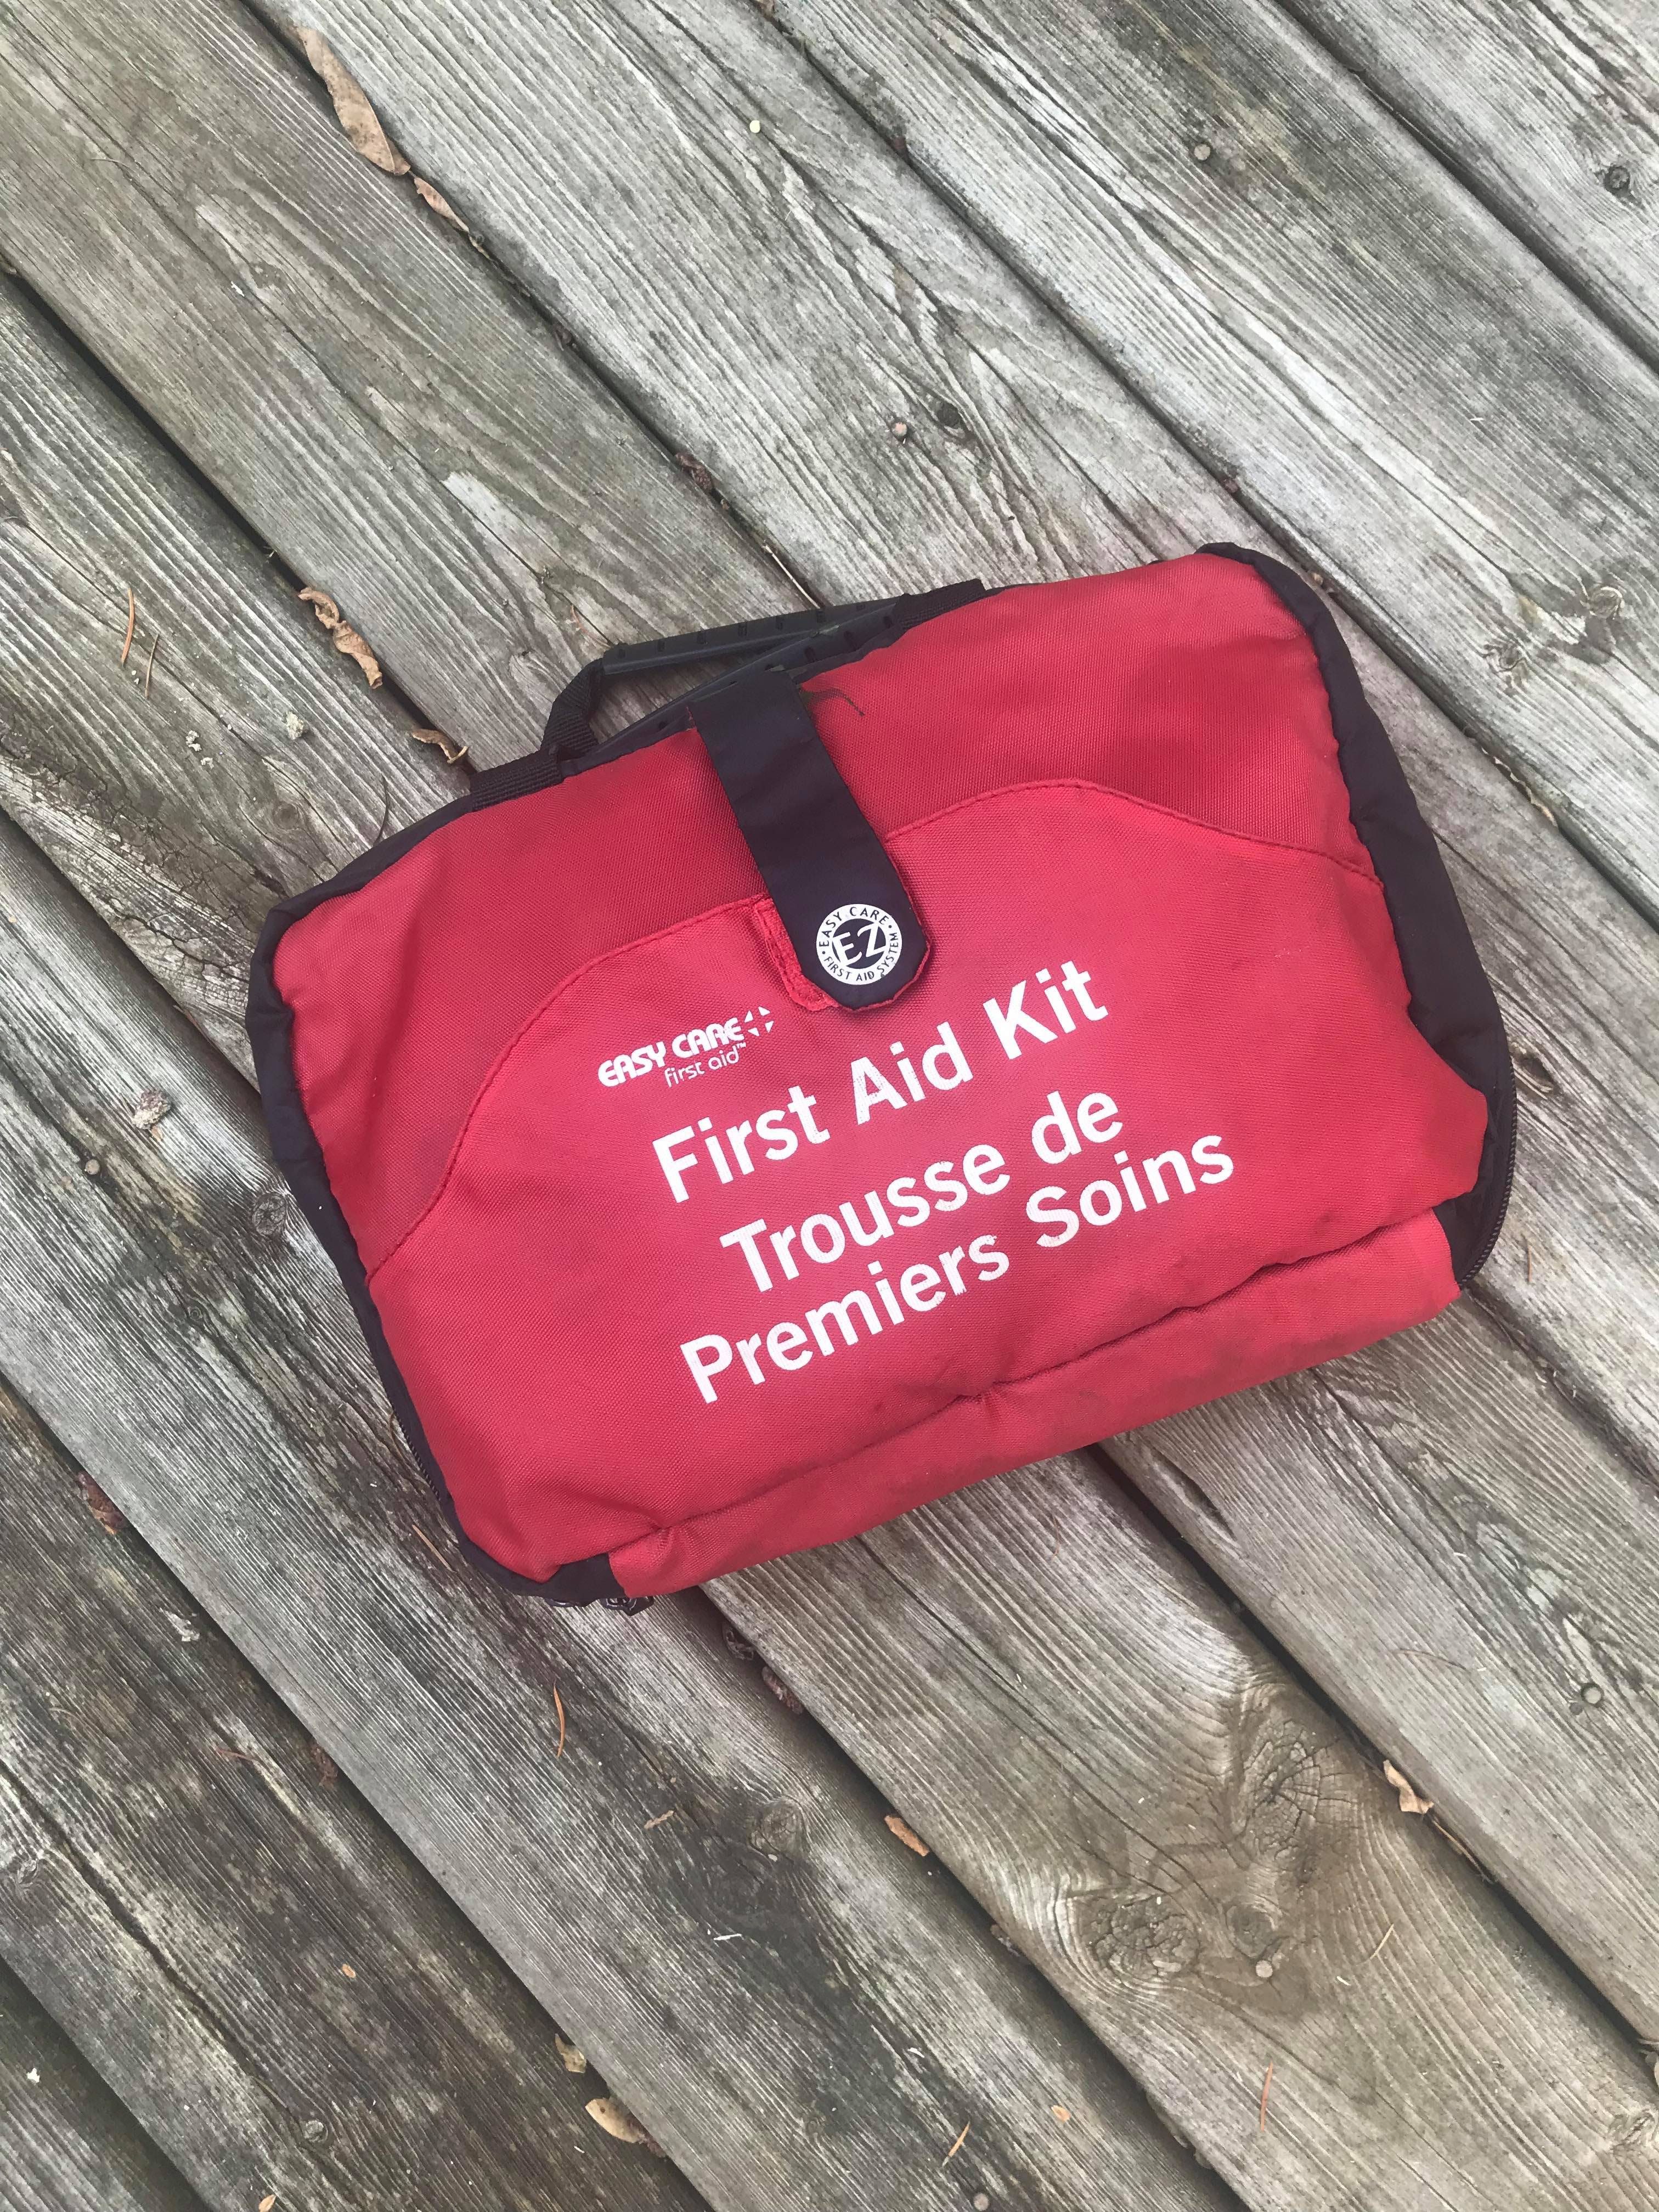 bring a first aid kit on your day trip